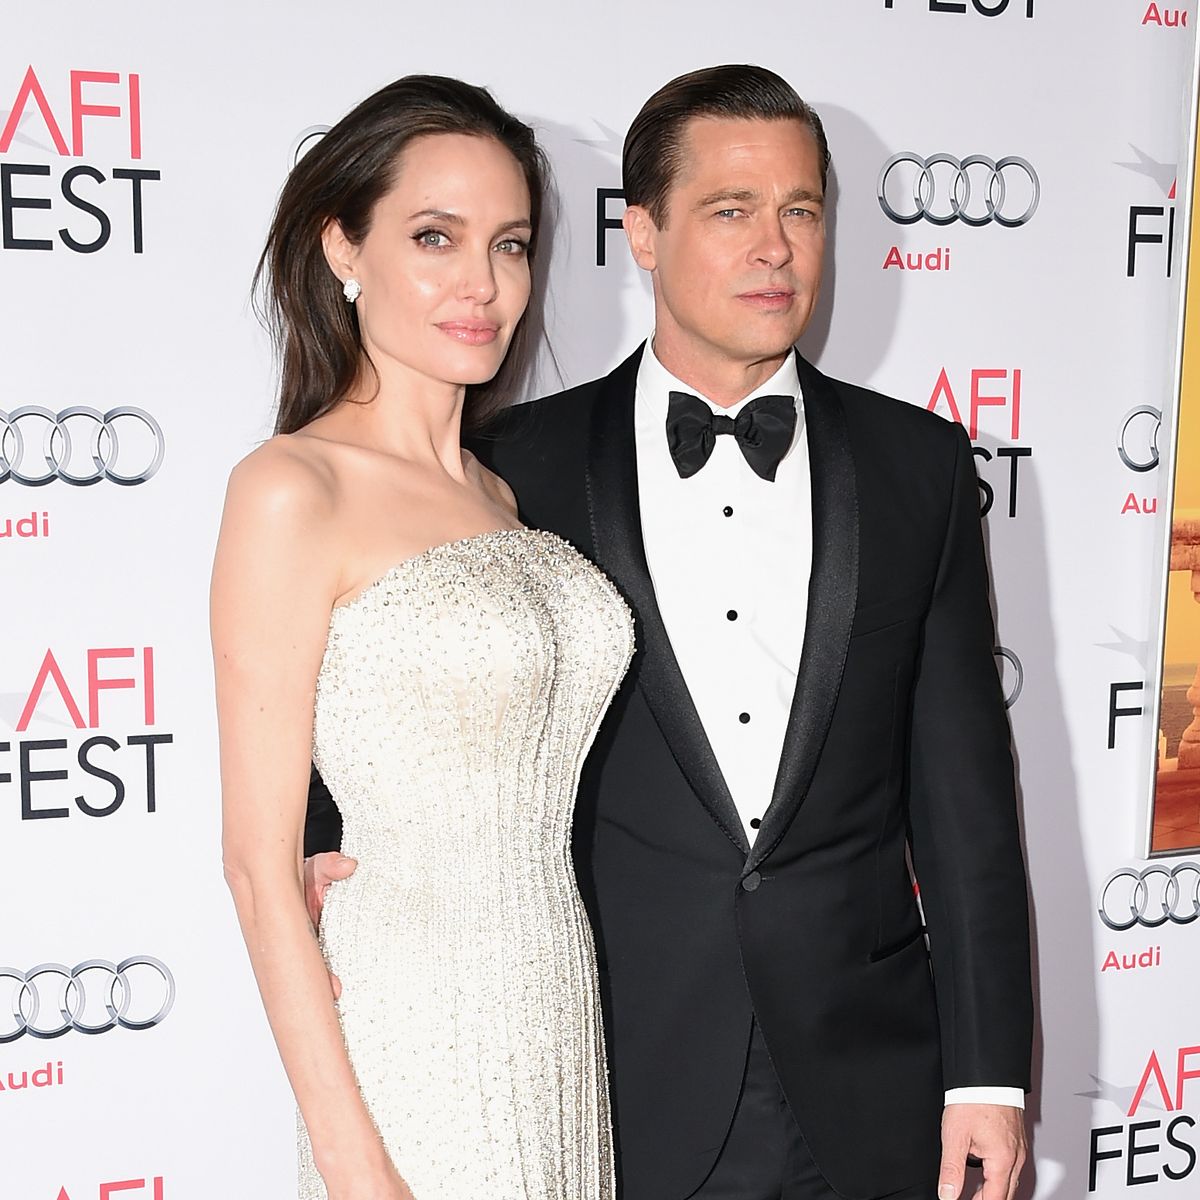 afi fest 2015 presented by audi opening night gala premiere of universal pictures' "by the sea"   arrivals